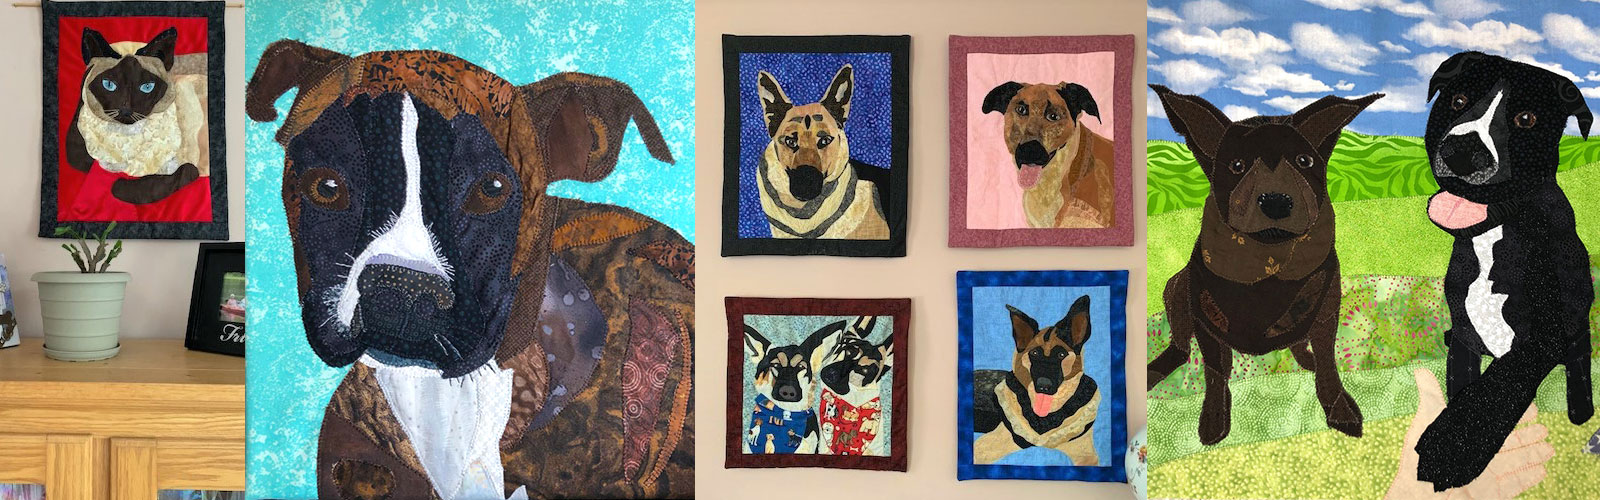 collage of pet memorial portraits: cat and dog wall hangings in fabric